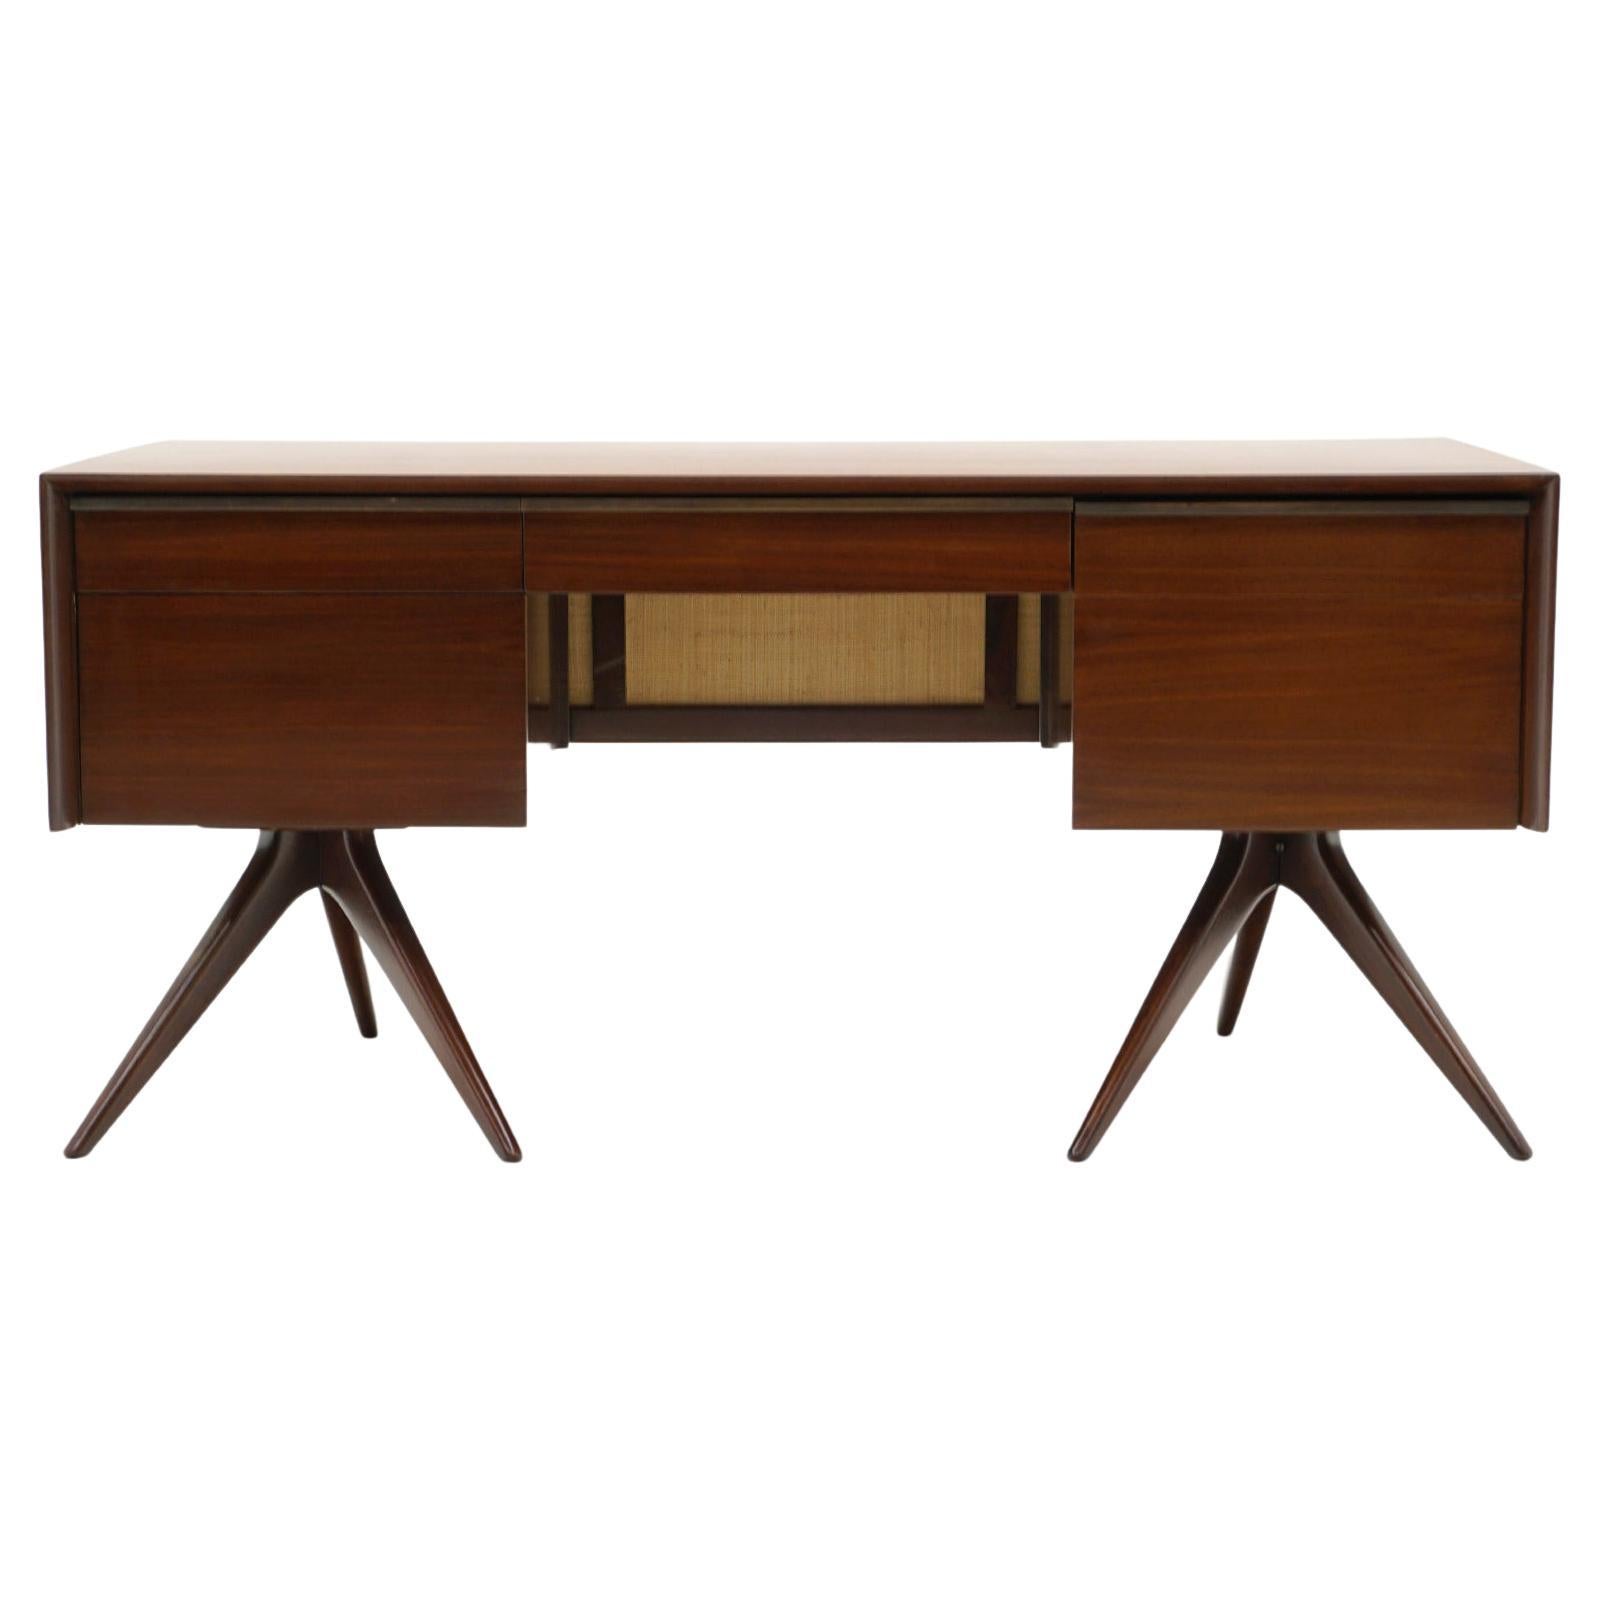 Early, one of a kind, Vladimir Kagan Desk.  Walnut case with cane modesty panel.  Super cool and sleek design.  Classic Kagan sculptural tripod legs support each side.  We believe the desk was refinished in the recent past as it is in very good